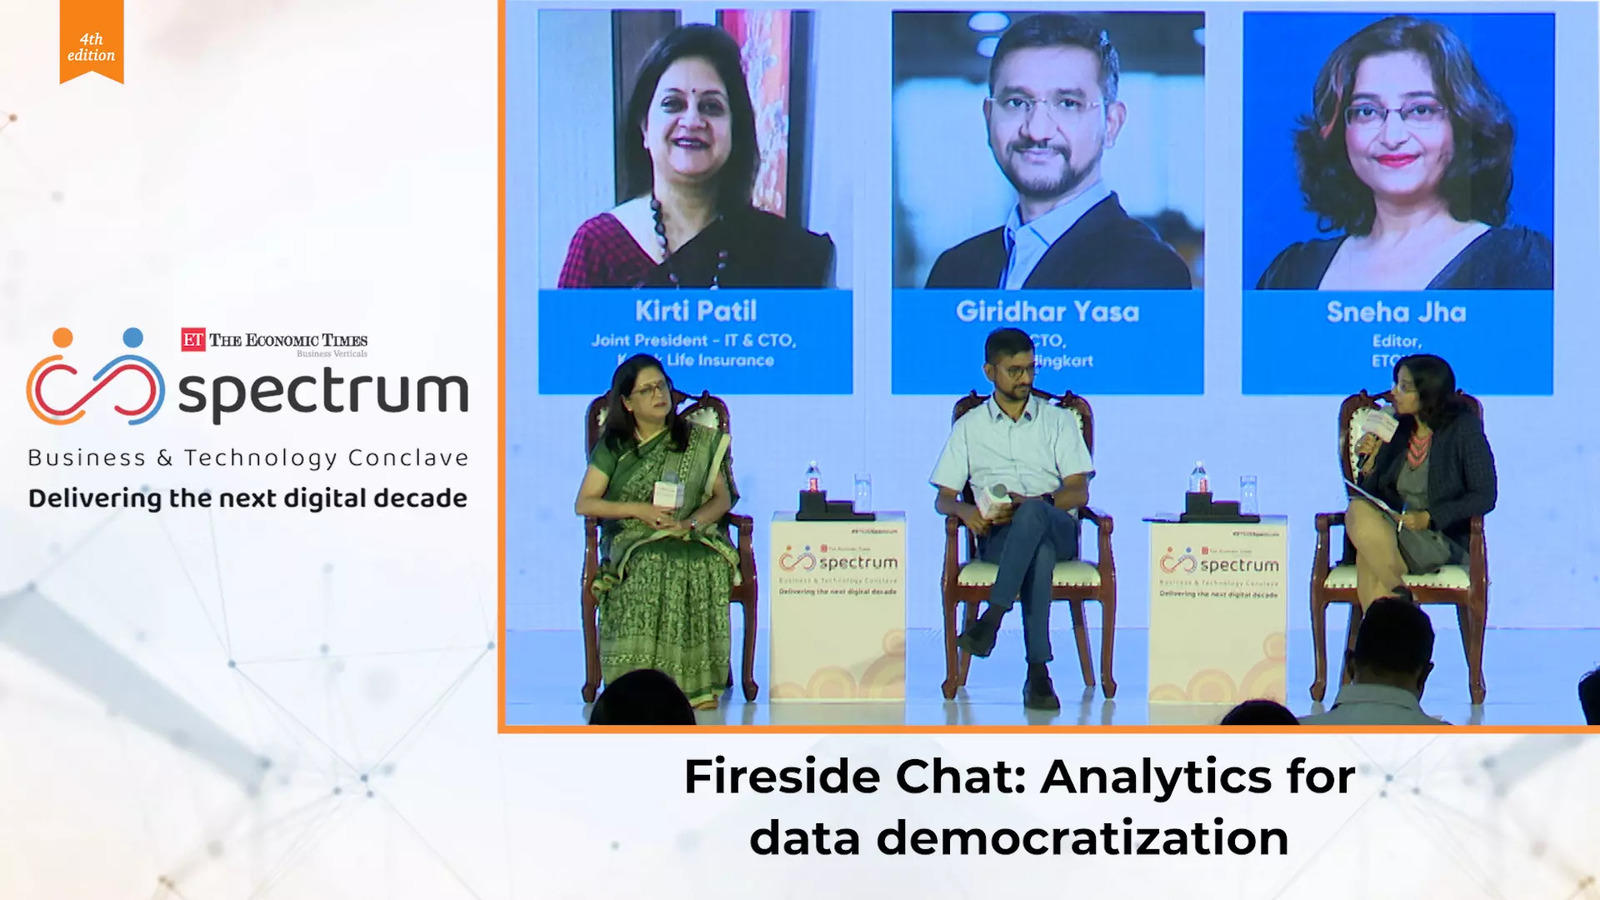 Experts weigh in on analytics for data democratization [Video]